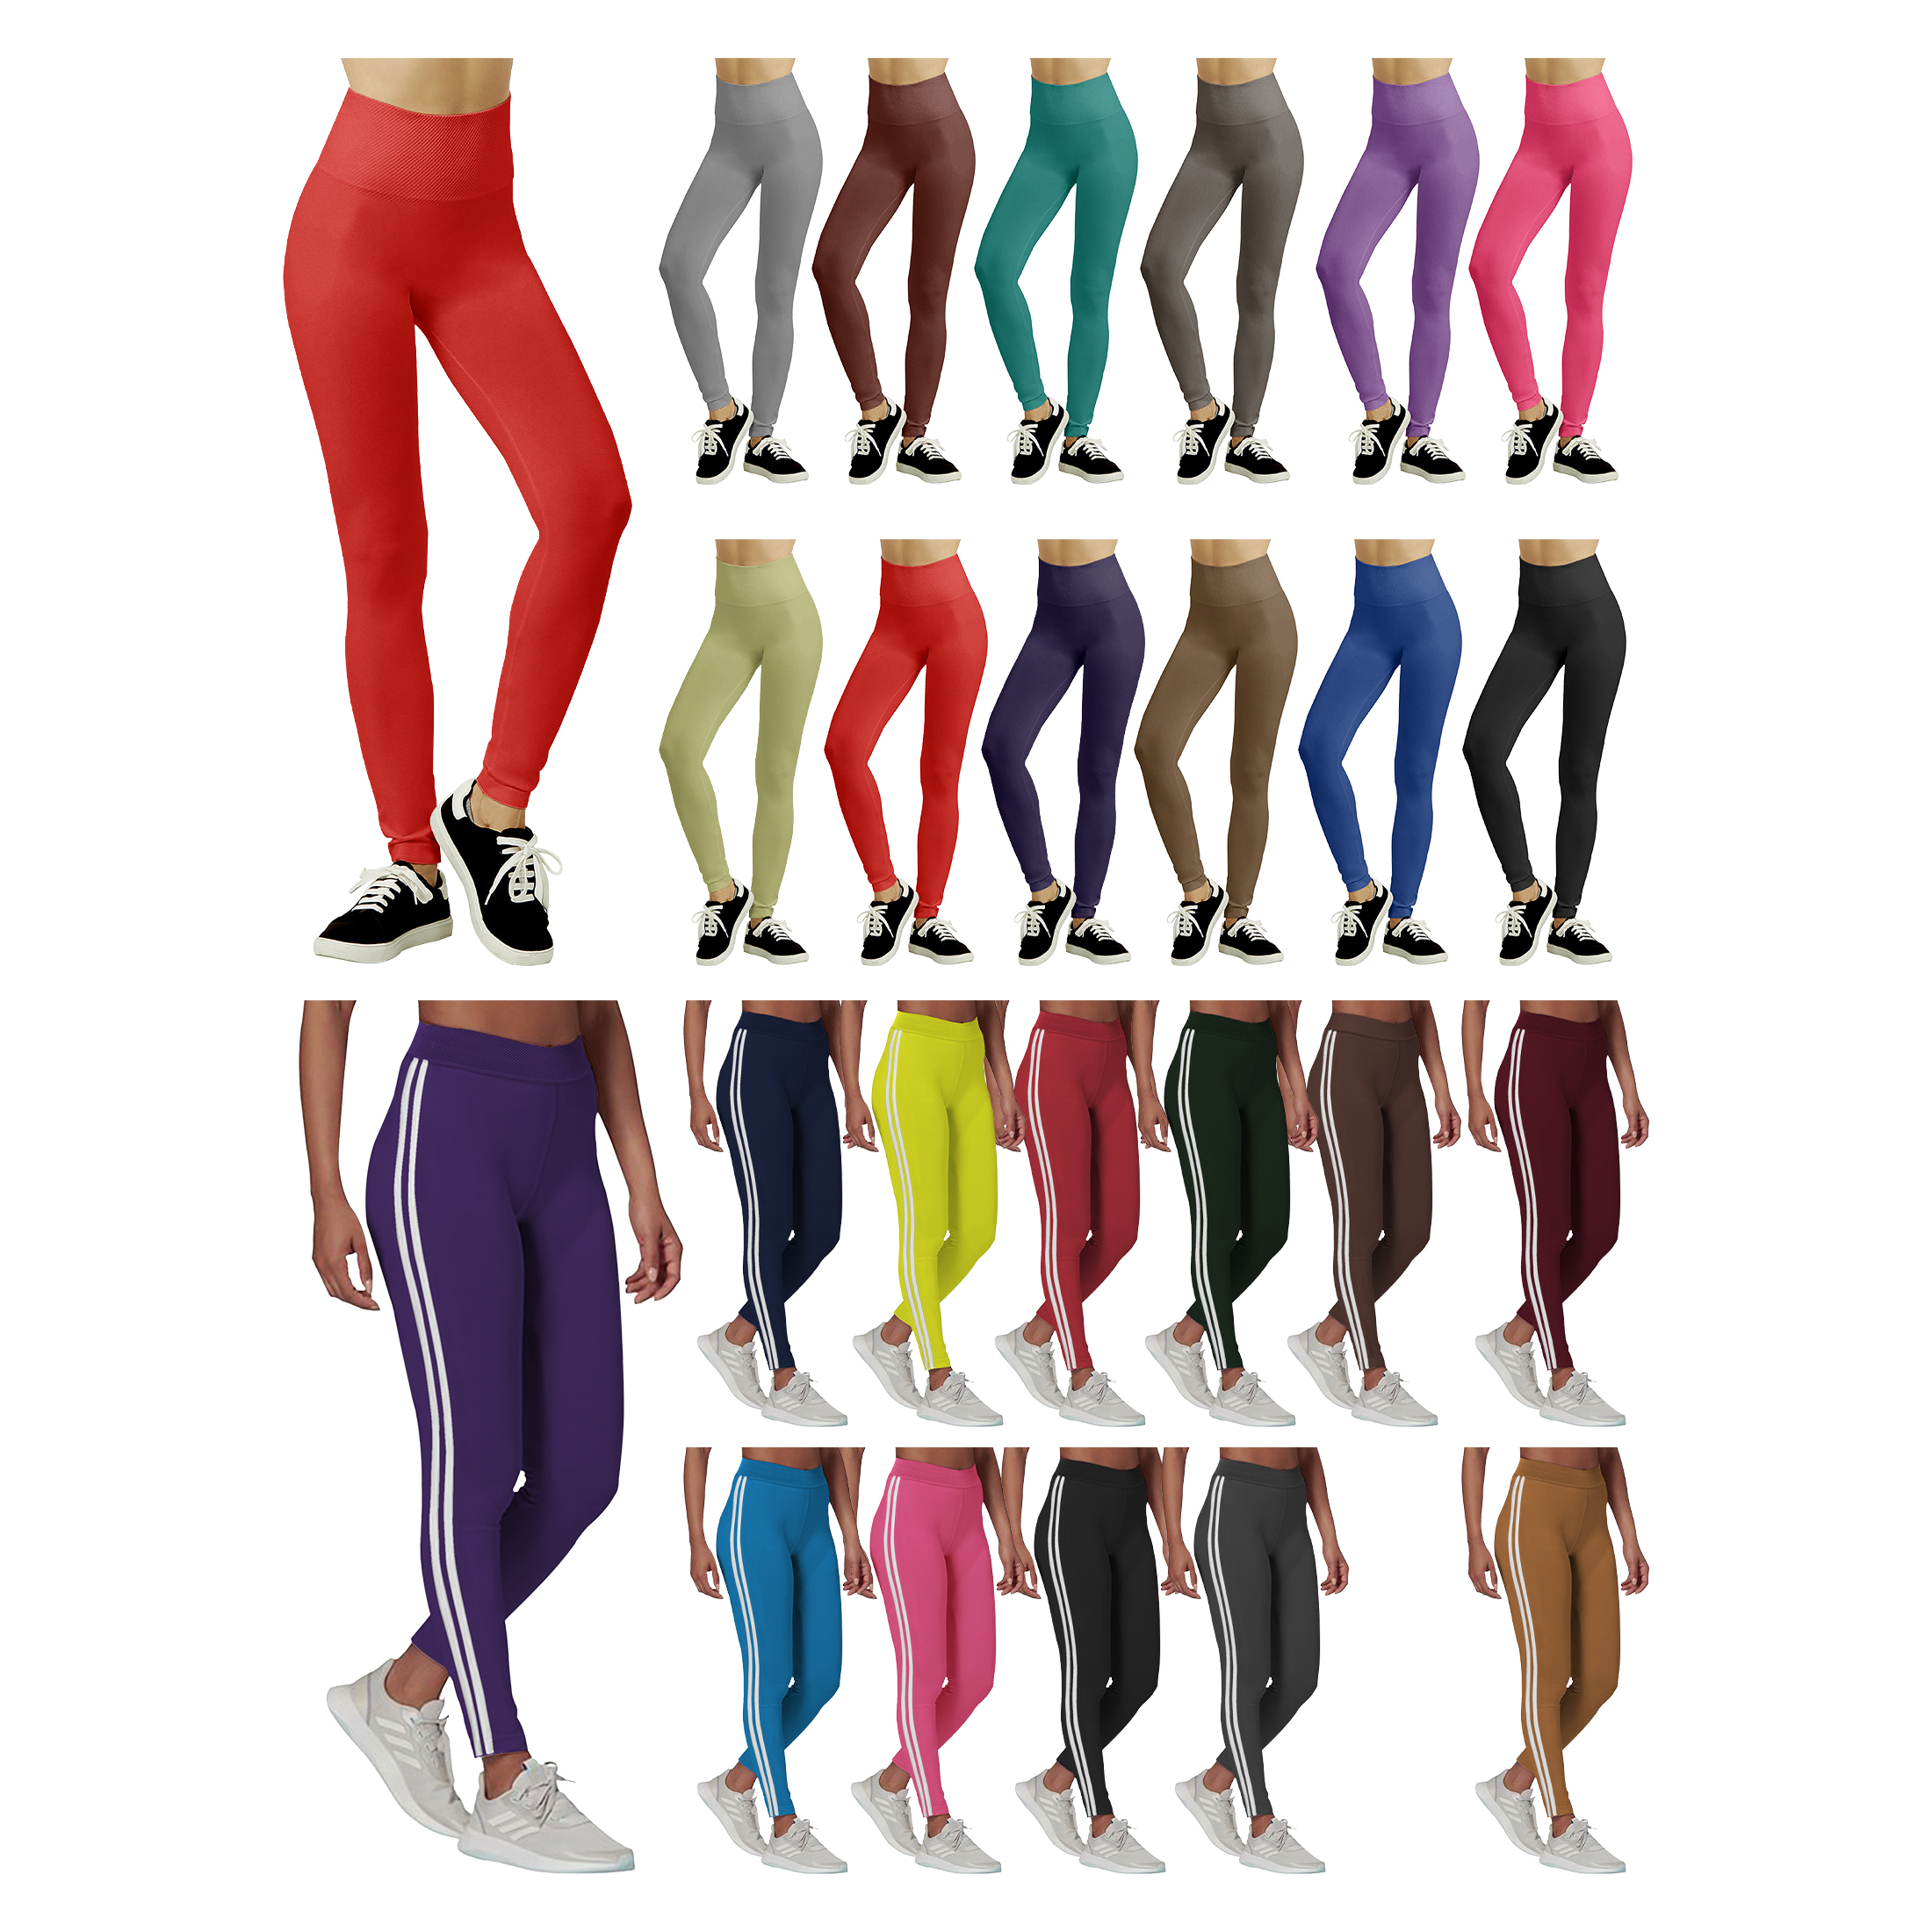 2-Pack: Women's Fleece-Lined High Waisted Workout Yoga Leggings - Solid & Striped, Small/Medium